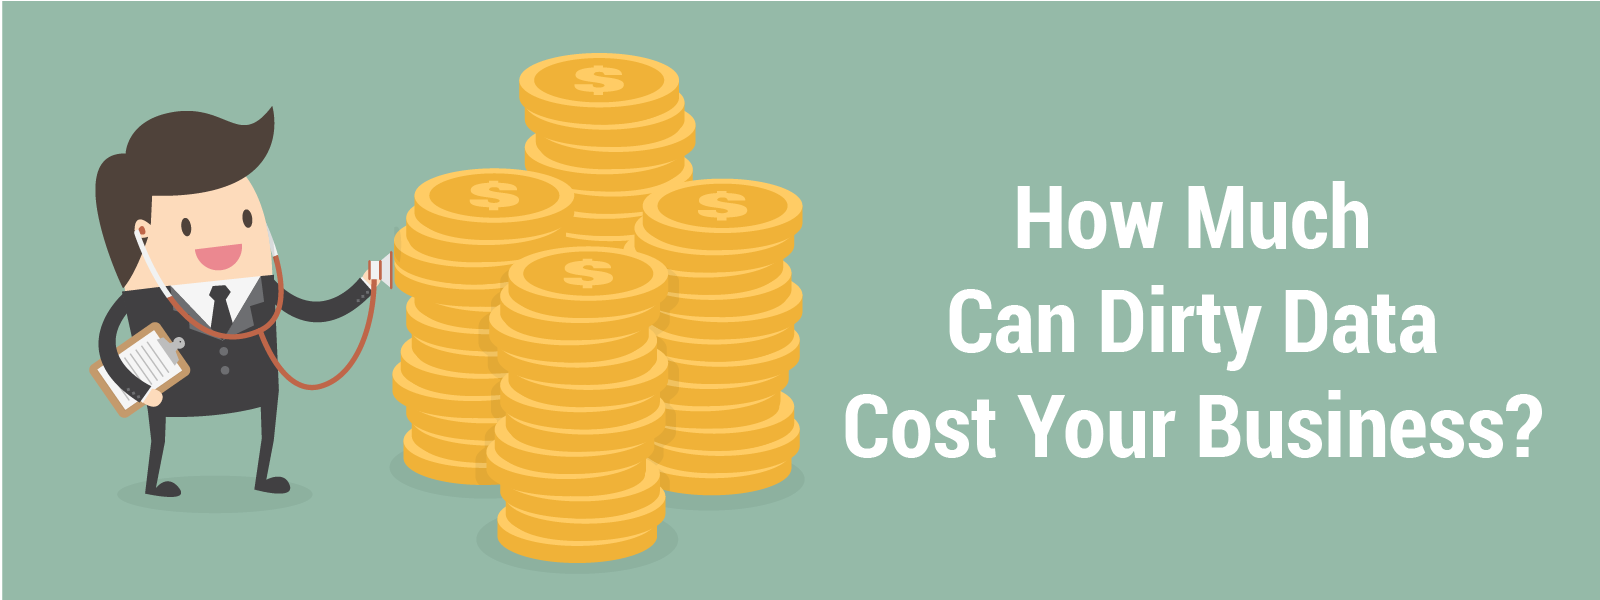 How Much Can Dirty Data Cost Your Business?